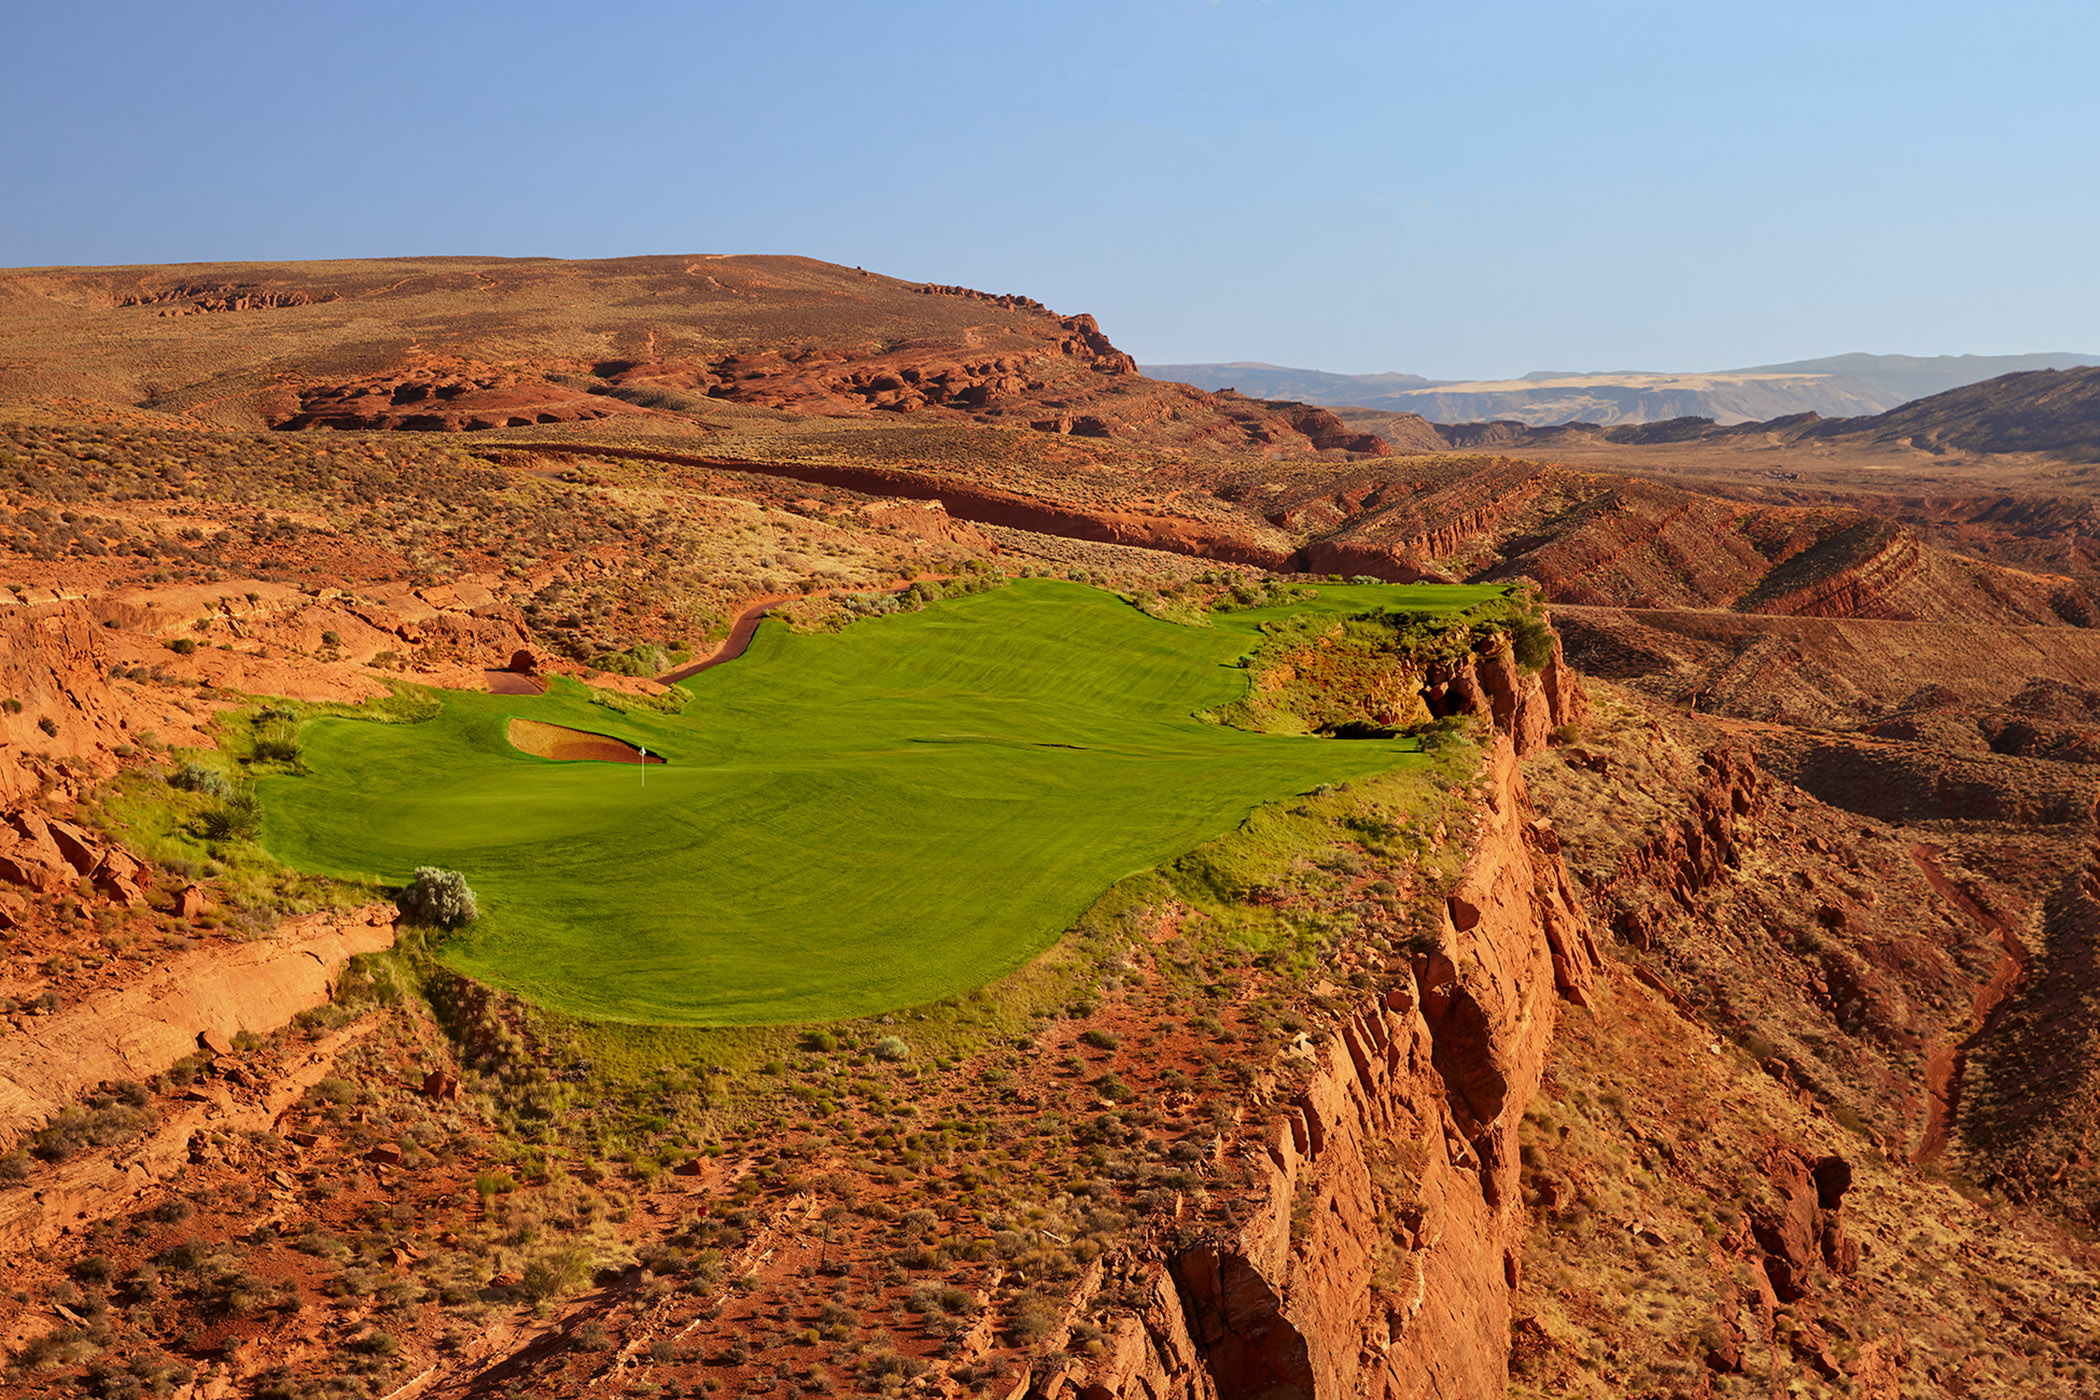 Sand Hollow Golf Course & Resort  - Stephen Denton Photography -  Los Angeles, California based  Commercial Photographer